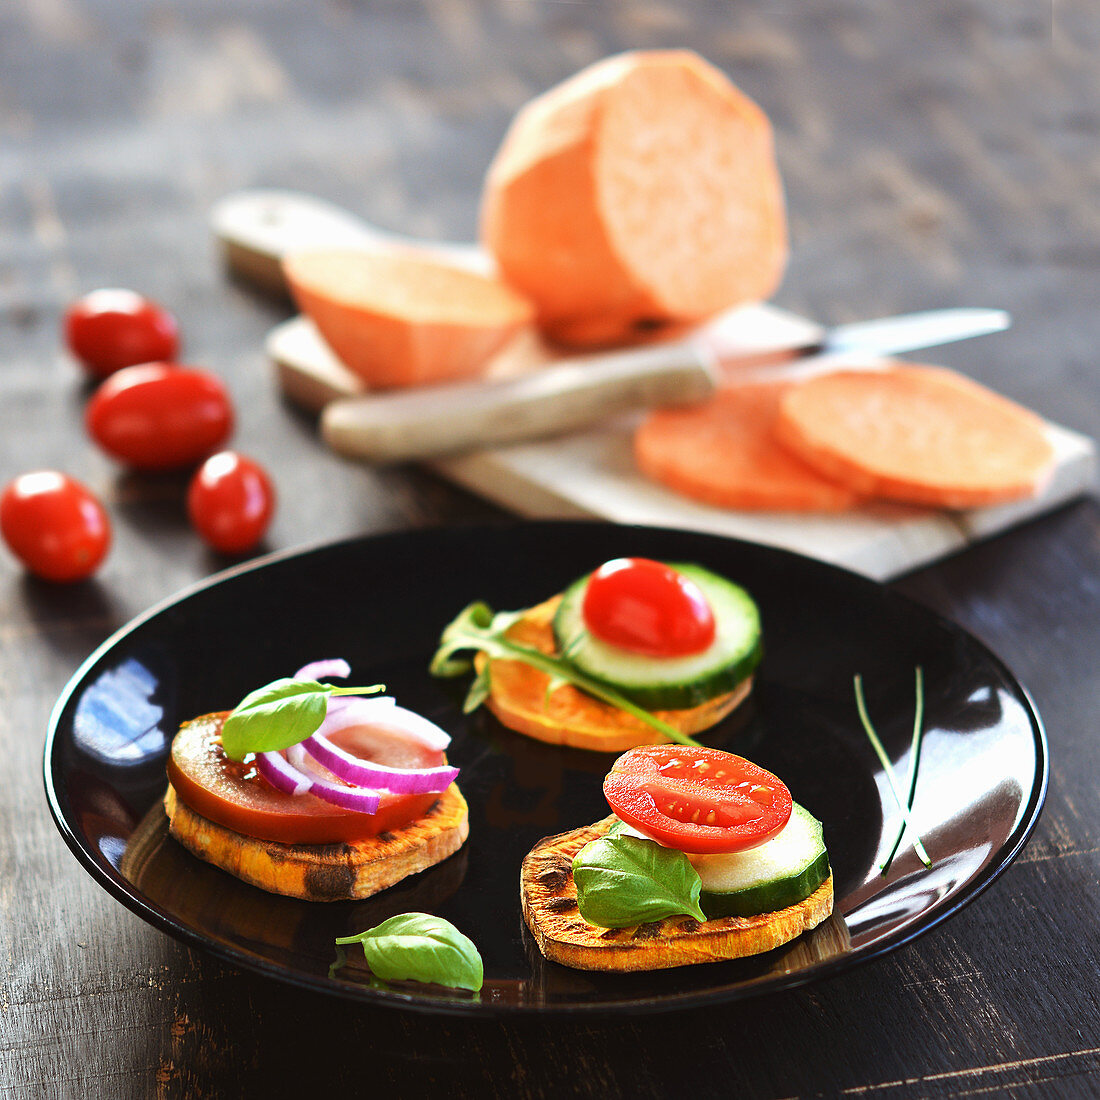 Sweet potato toasts with fresh vegetables as canapés